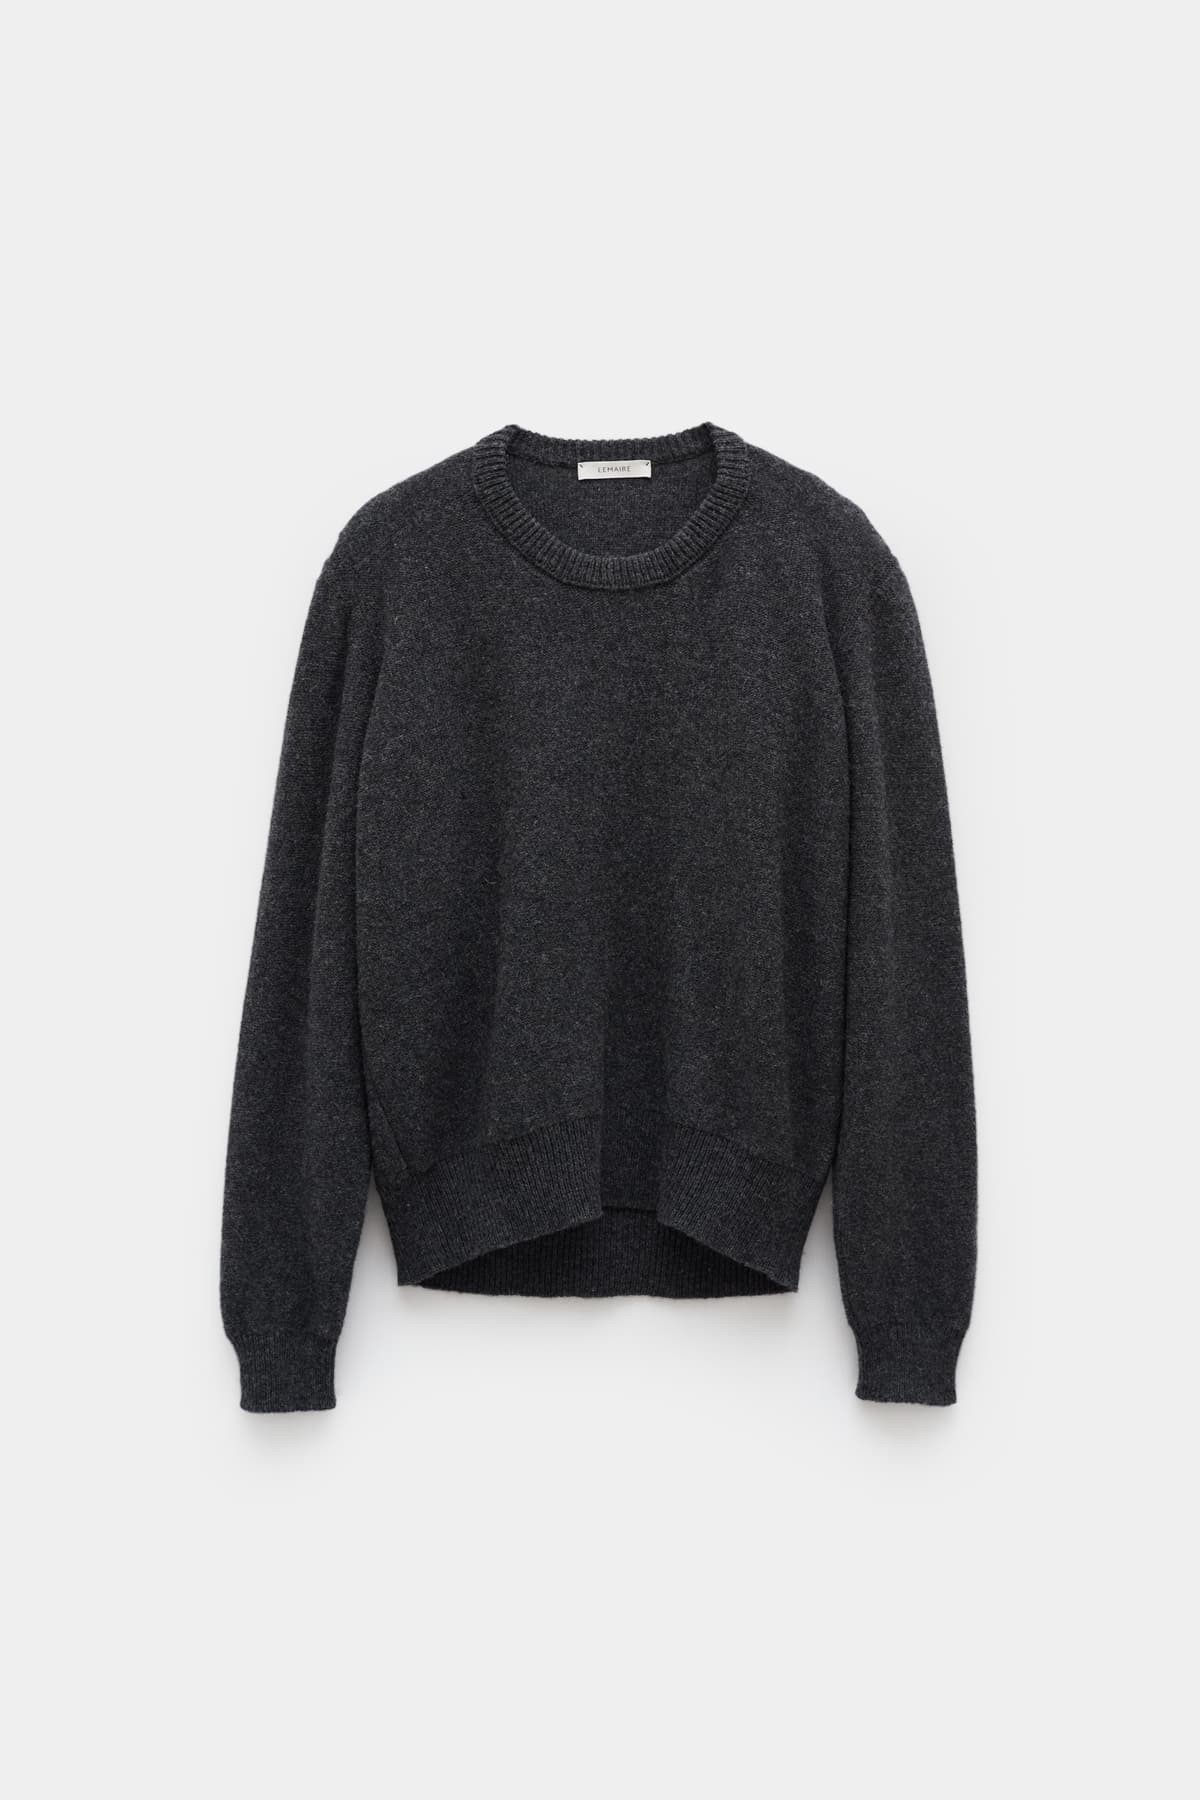 LEMAIRE PENGUIN TILTED CREW NECK SWEATER IAMNUE